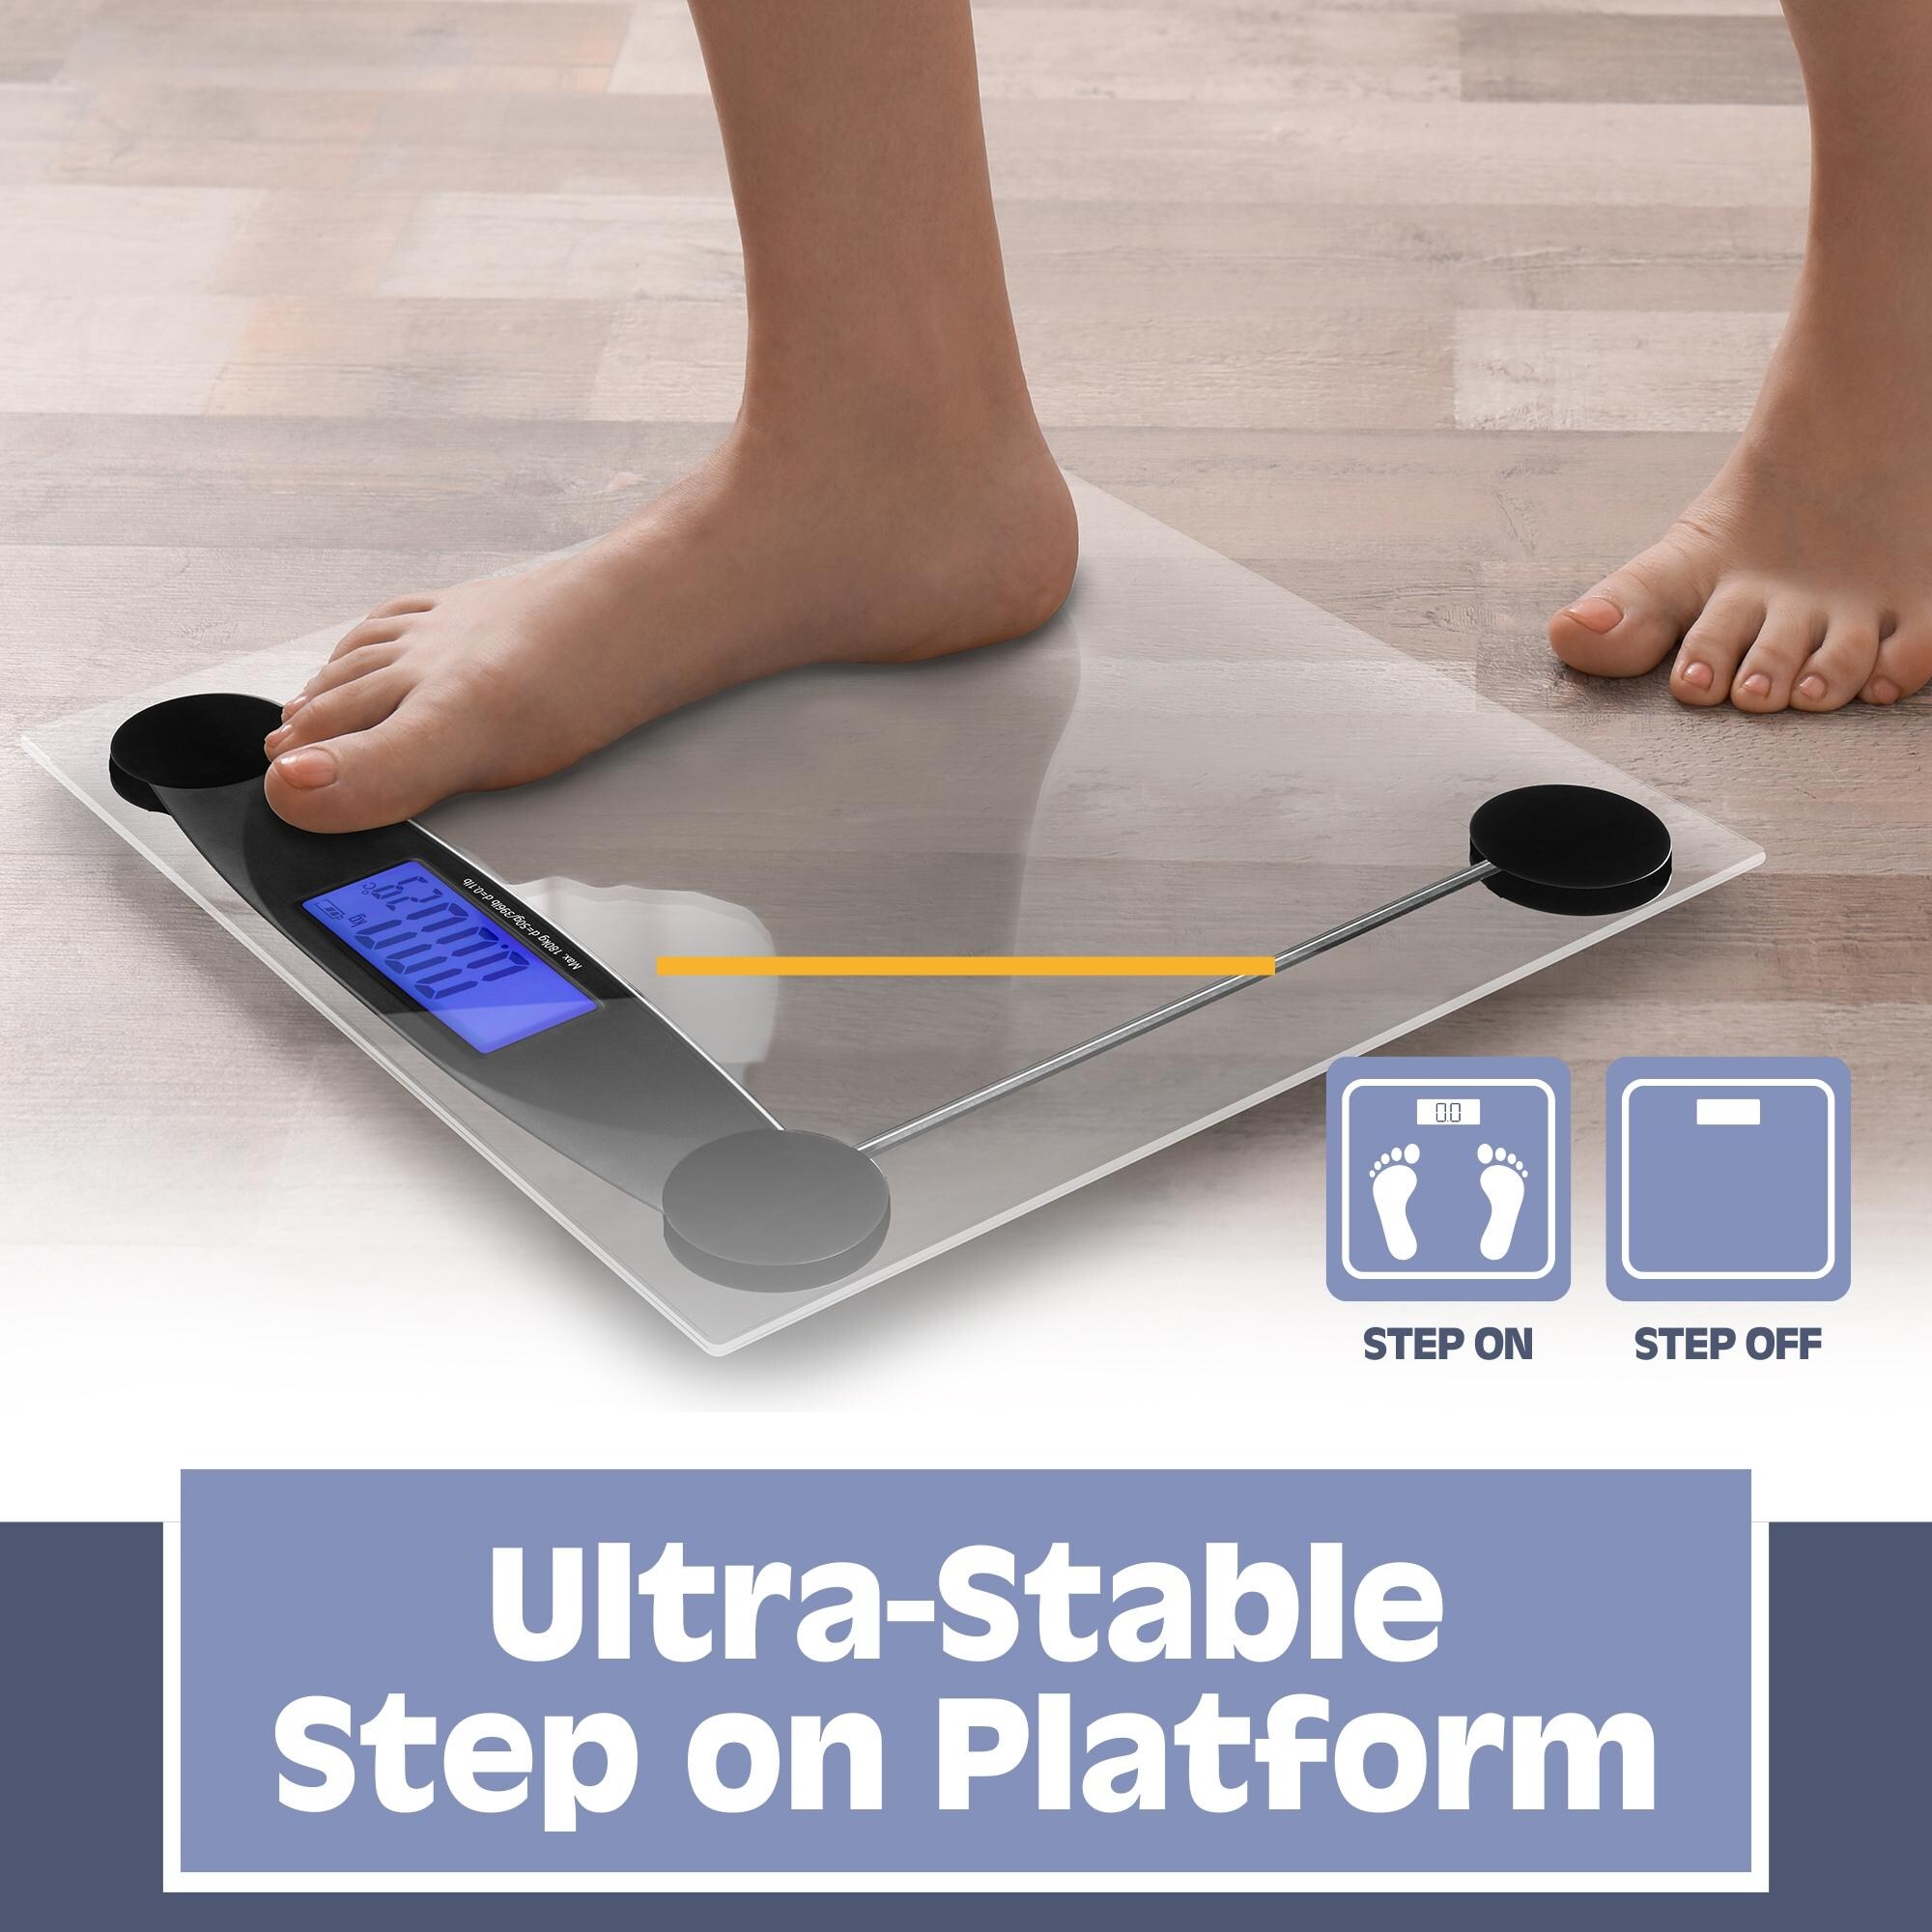 https://ak1.ostkcdn.com/images/products/is/images/direct/0d473f279adb74c76624593f8c02c783c832c174/Digital-Bathroom-Scale-for-Body-Weight%2C-Auto-Step-On-Design%2C-Ultra-Thin%2C-Clear-Glass.jpg